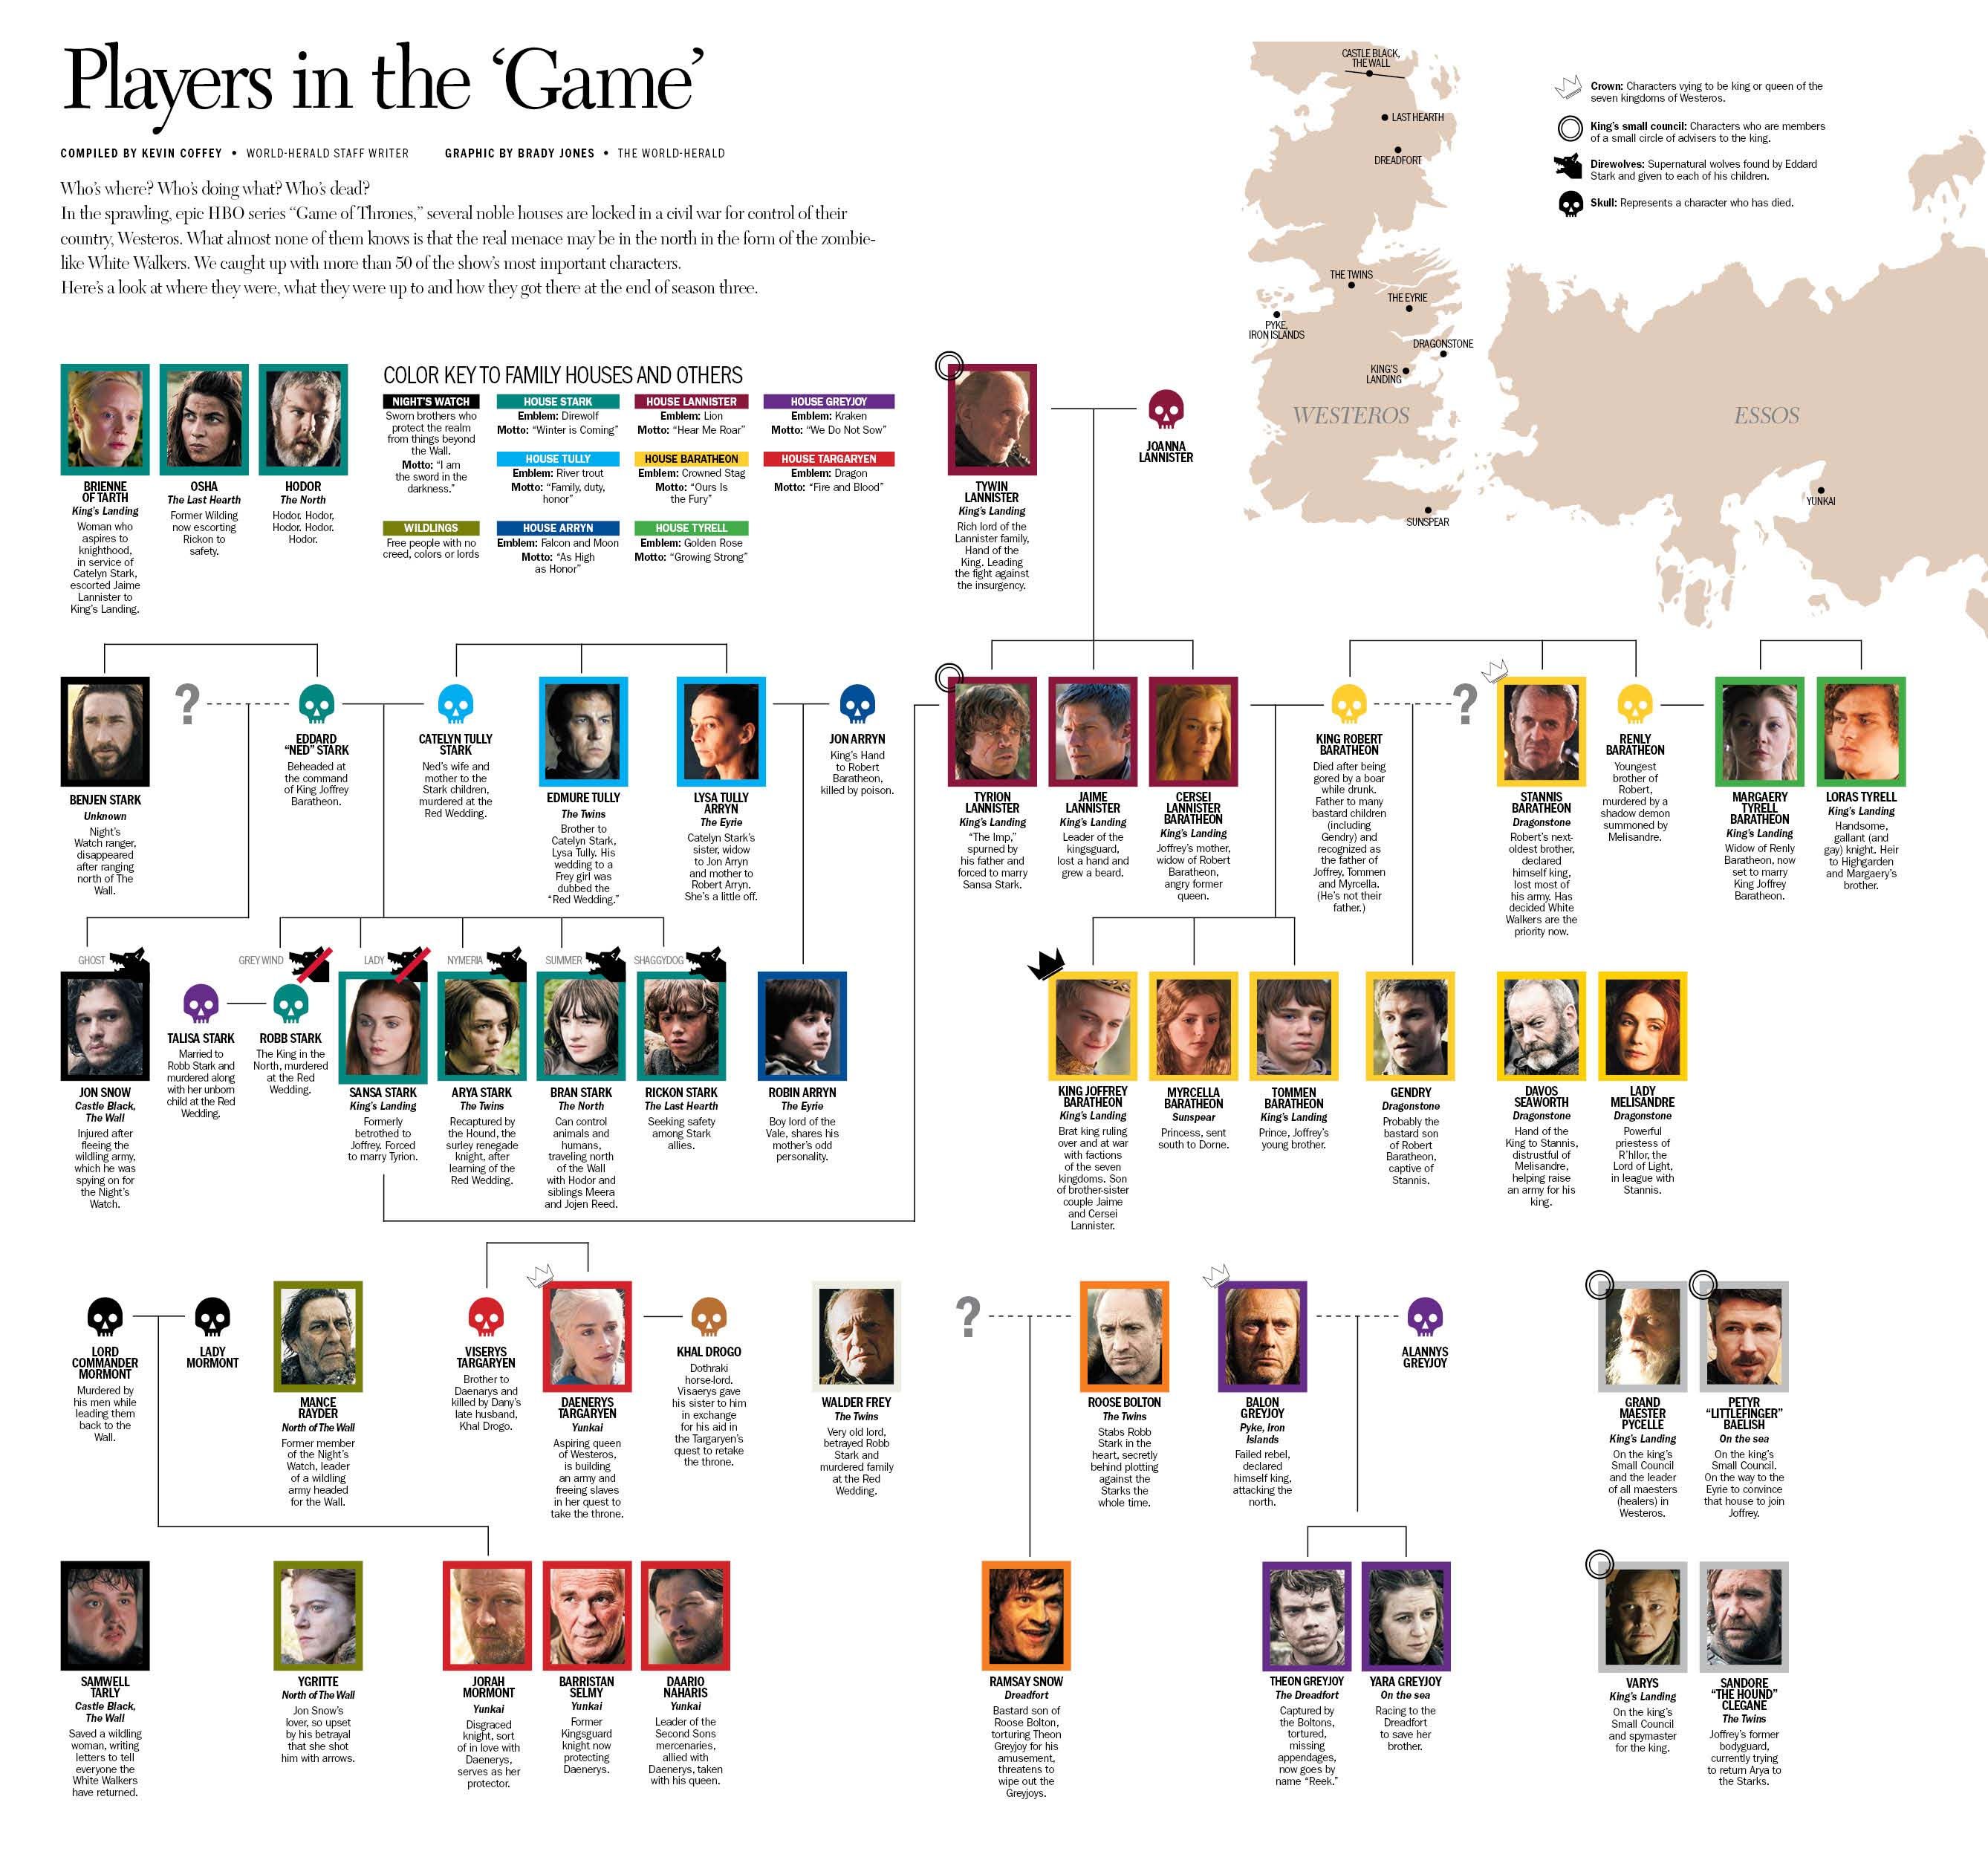 Game of thrones characters guide with pictures